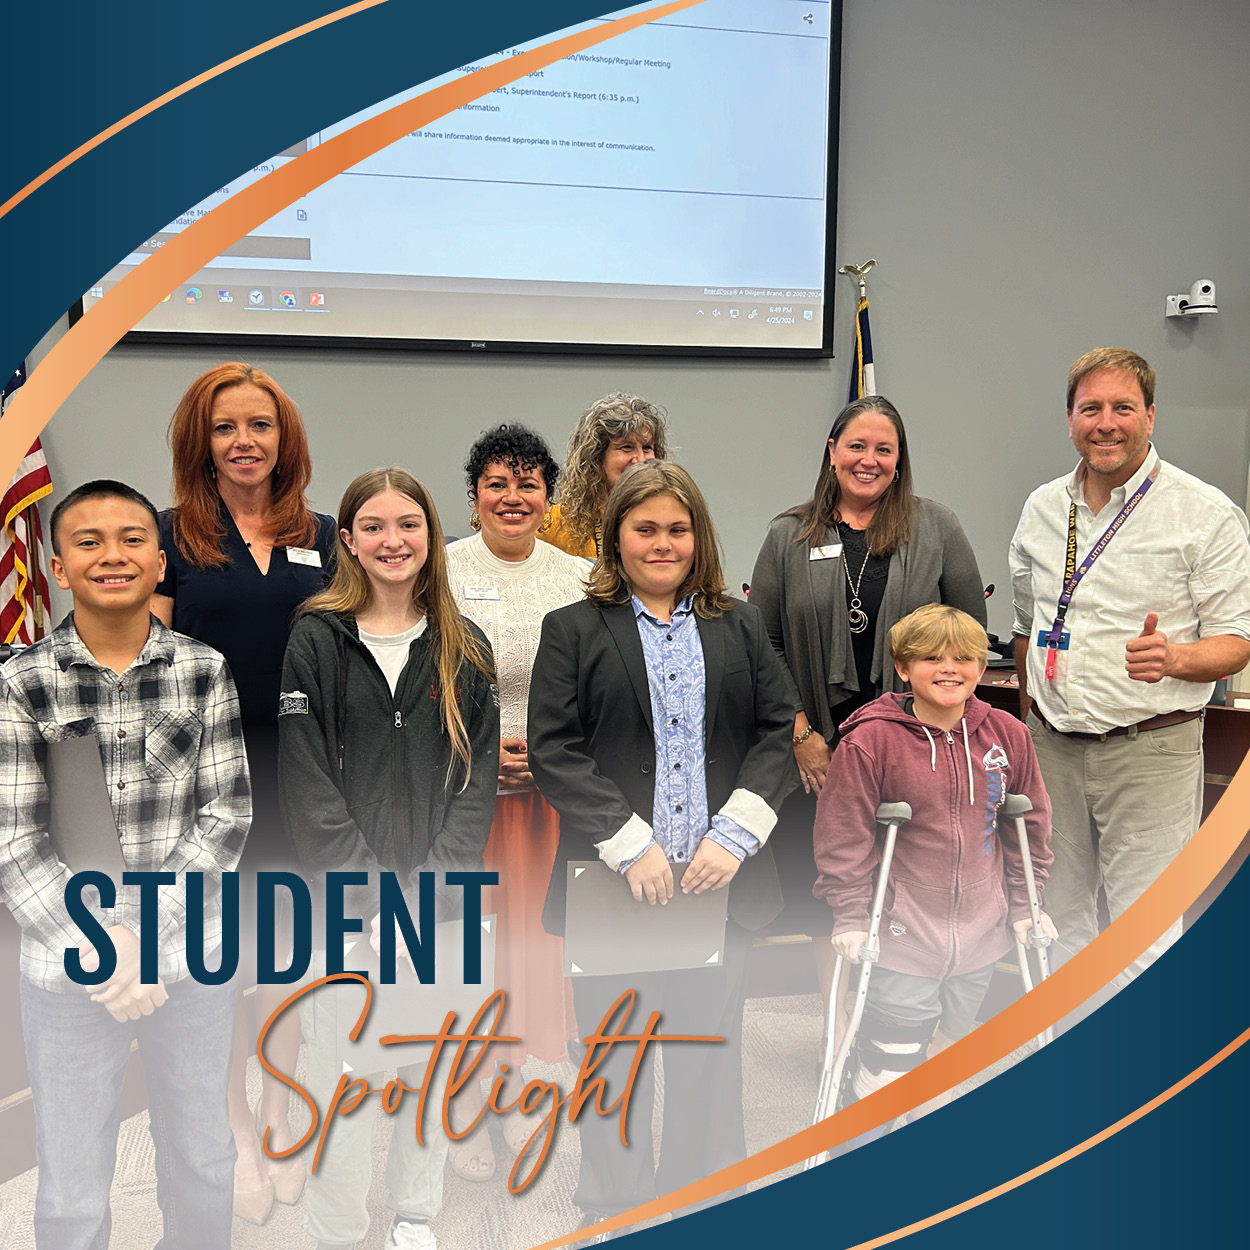 Group photo of Centennial Academy students with their Student Spotlight certificates and the Board of Education in front of the Board's dais.